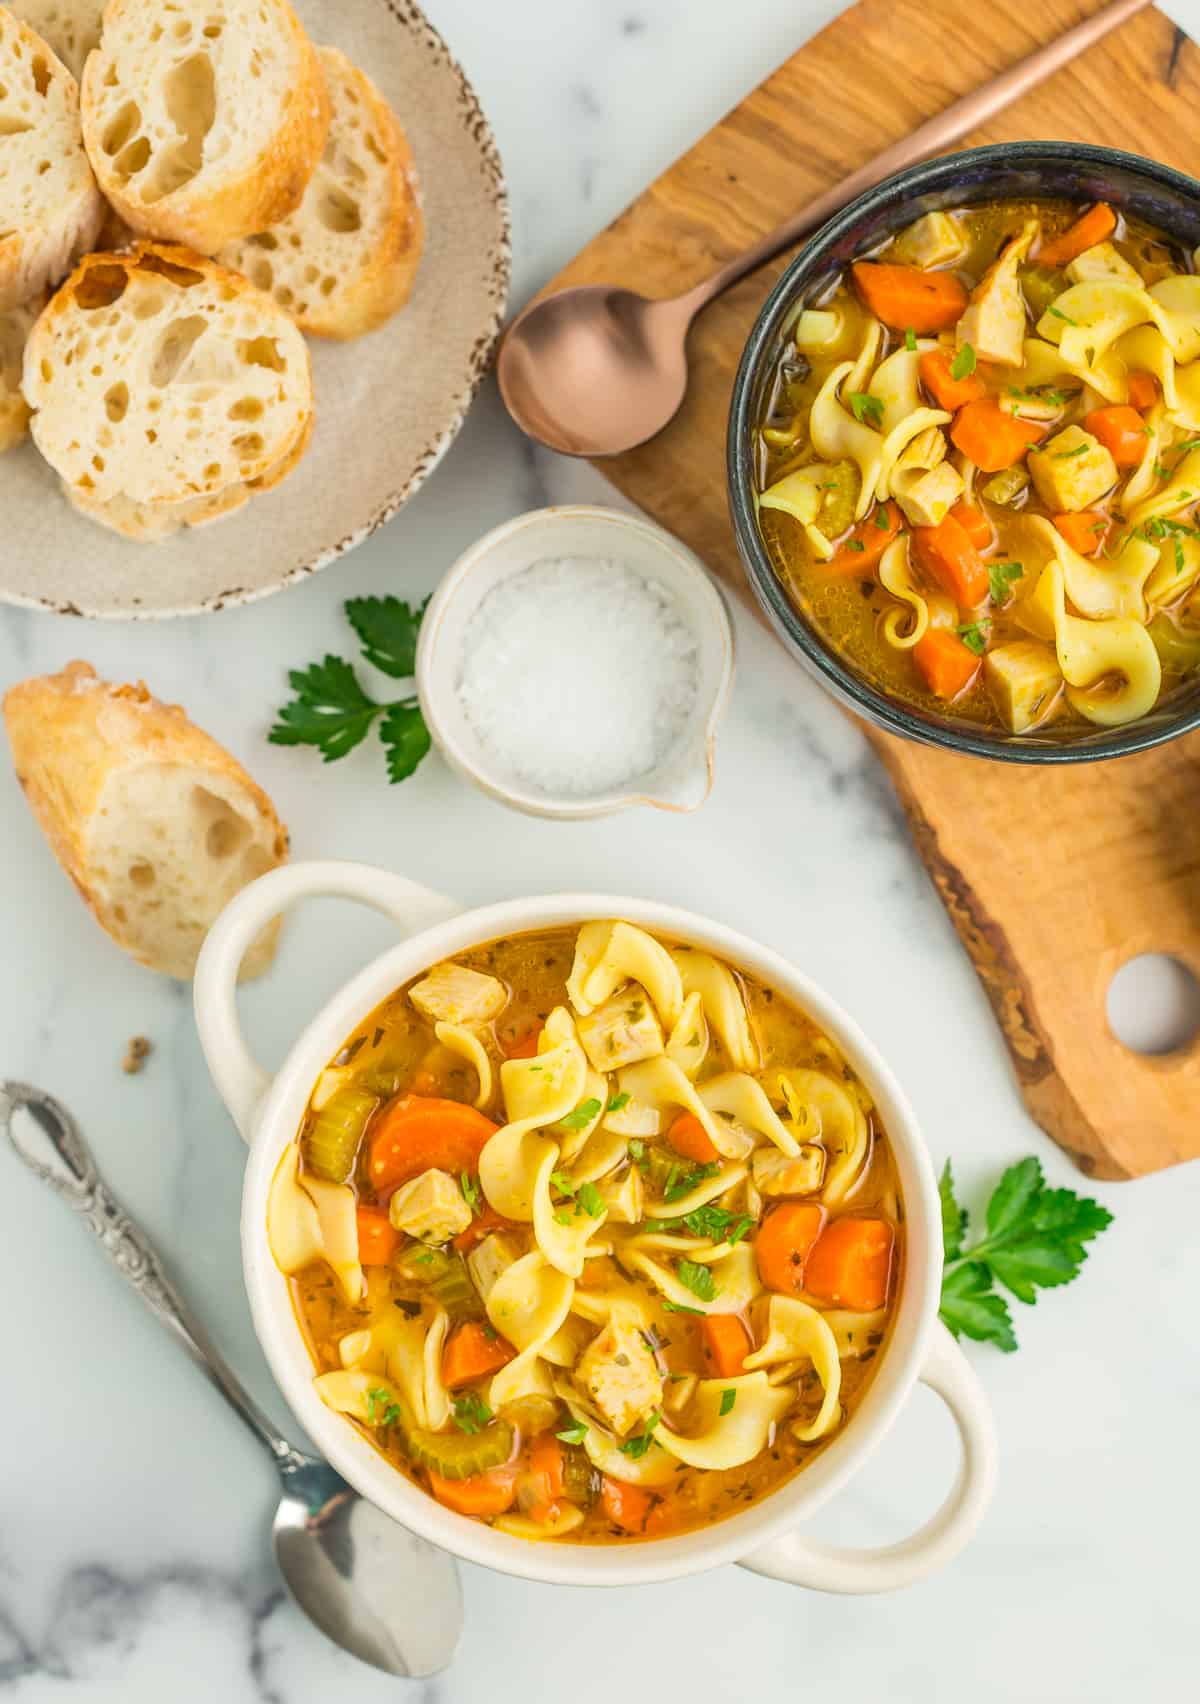 Two bowls of turkey and vegetable noodle soup on a marbled board with baguettes, salt, and other ingredients.